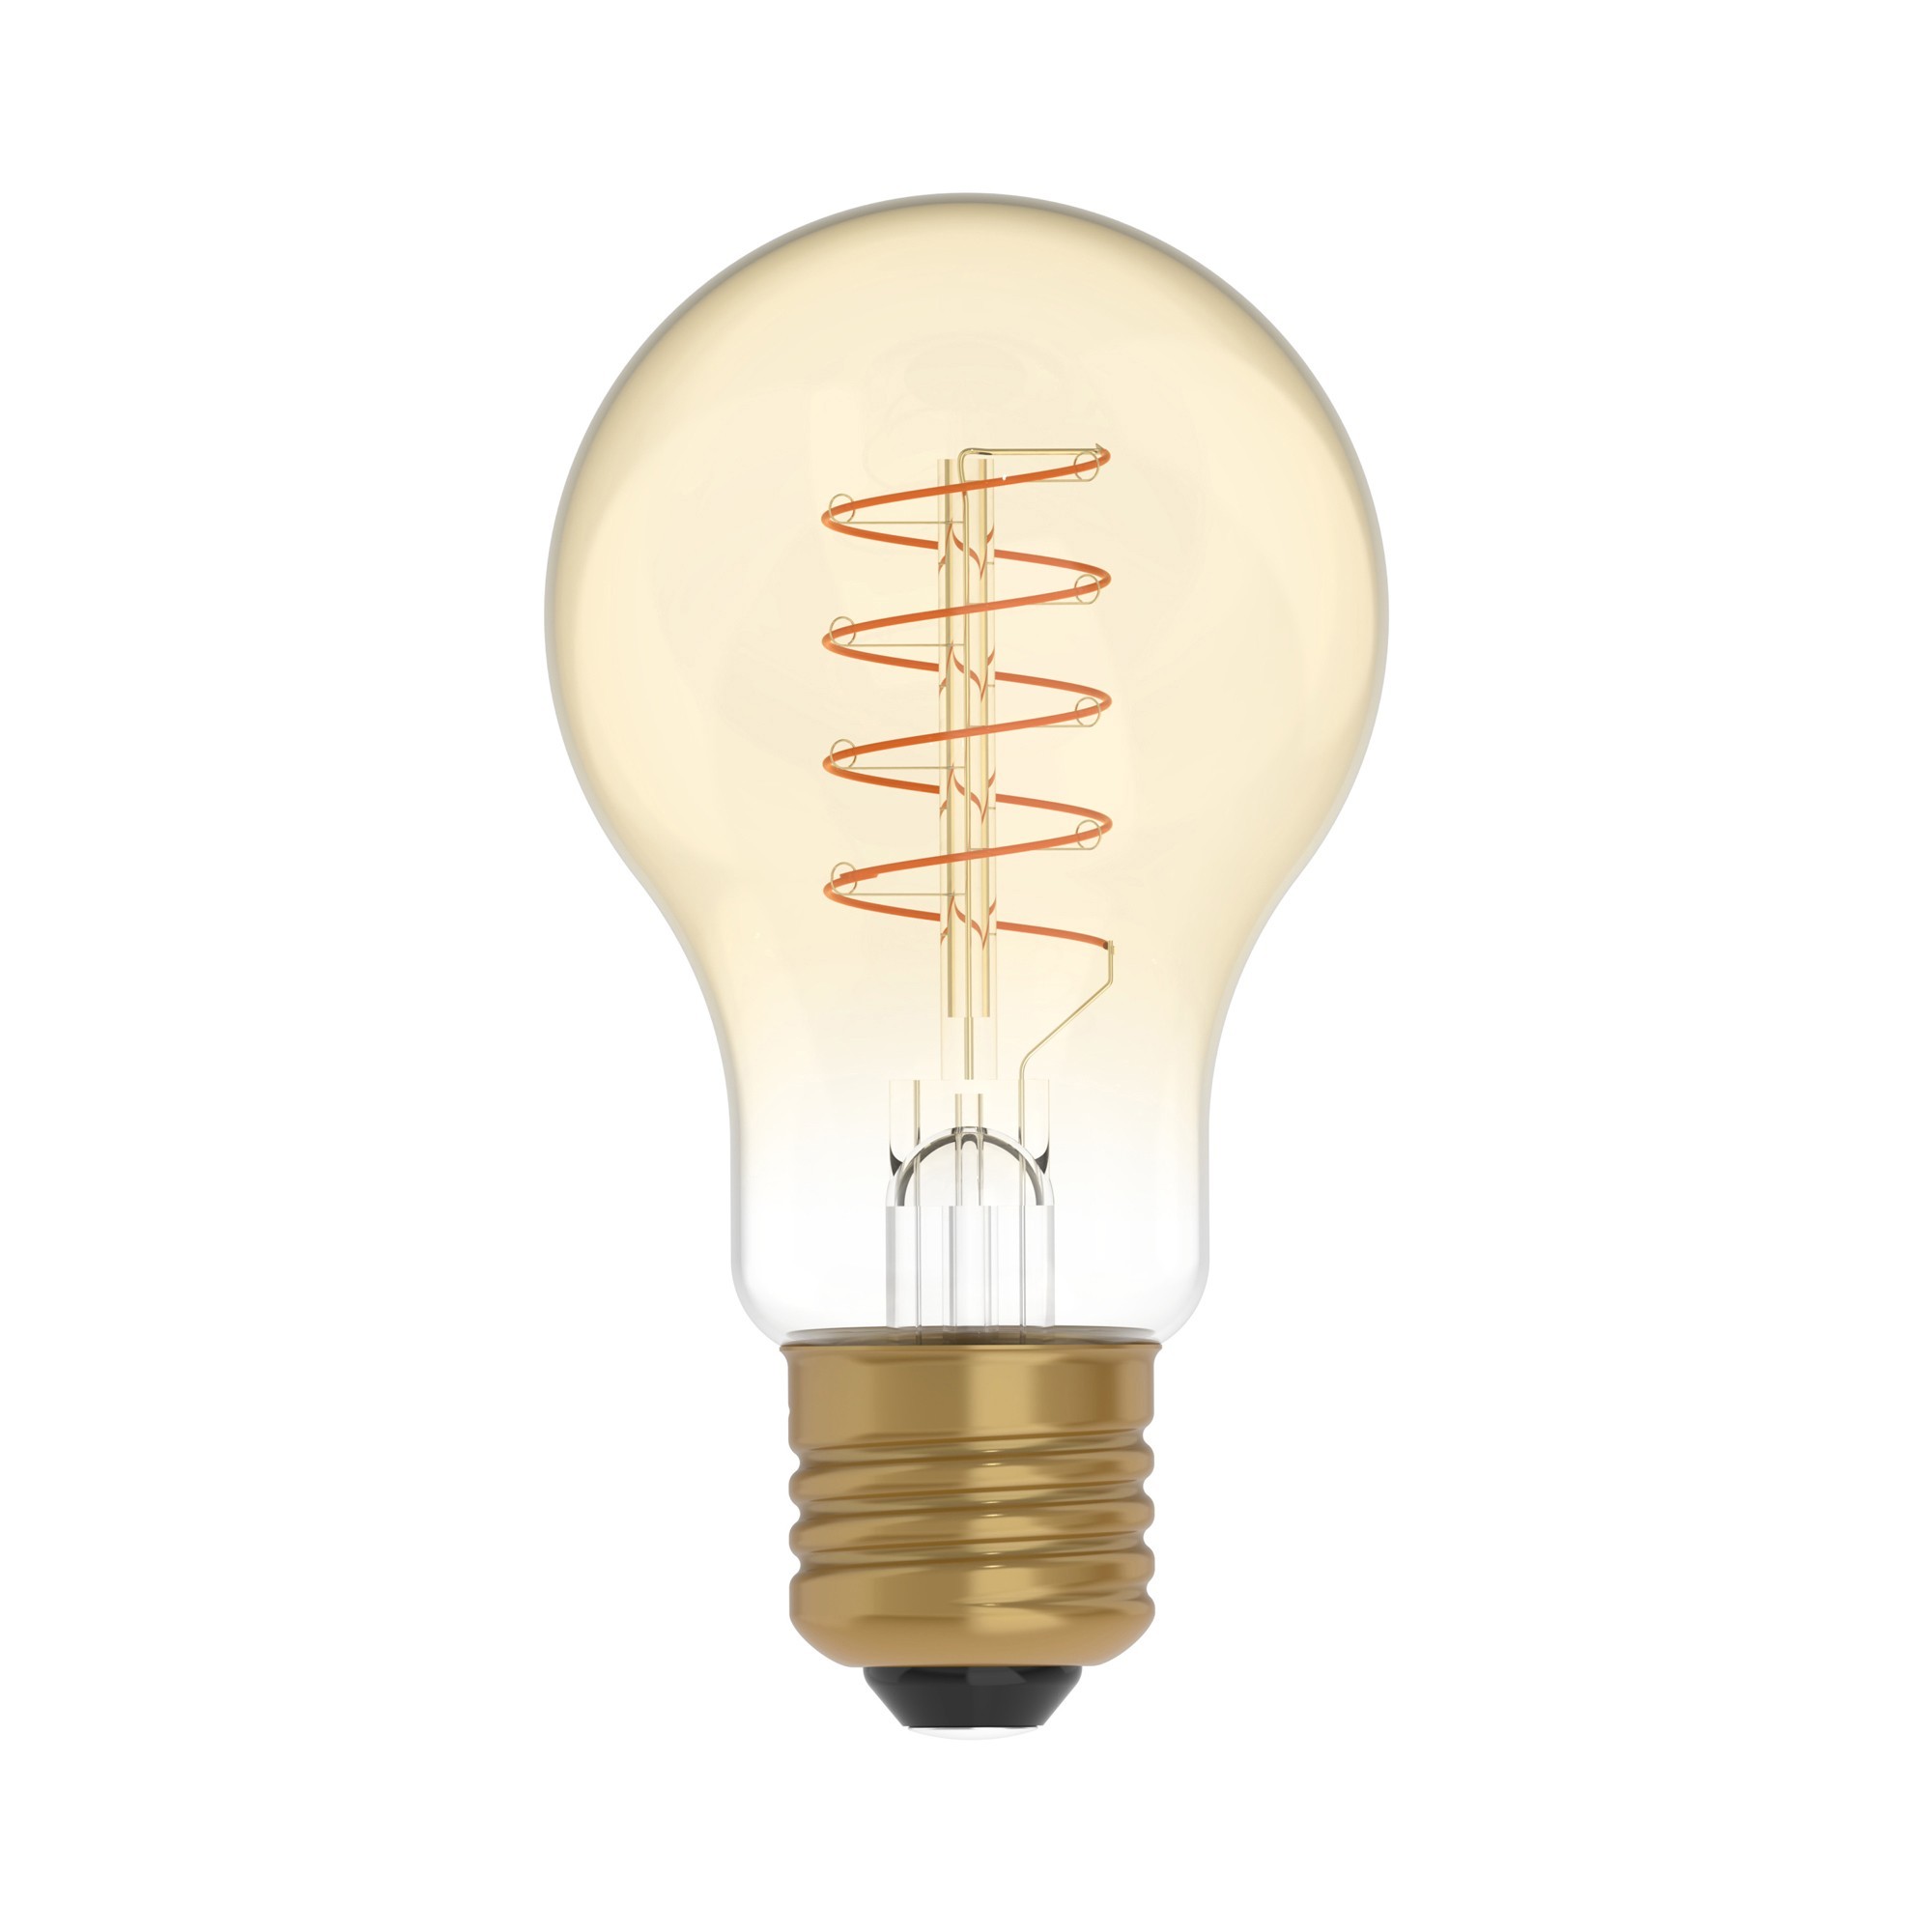 C03 - LED Light Bulb A60, E27, 4W, 1800K, 250Lm, with extra slim spiral filament, golden glass